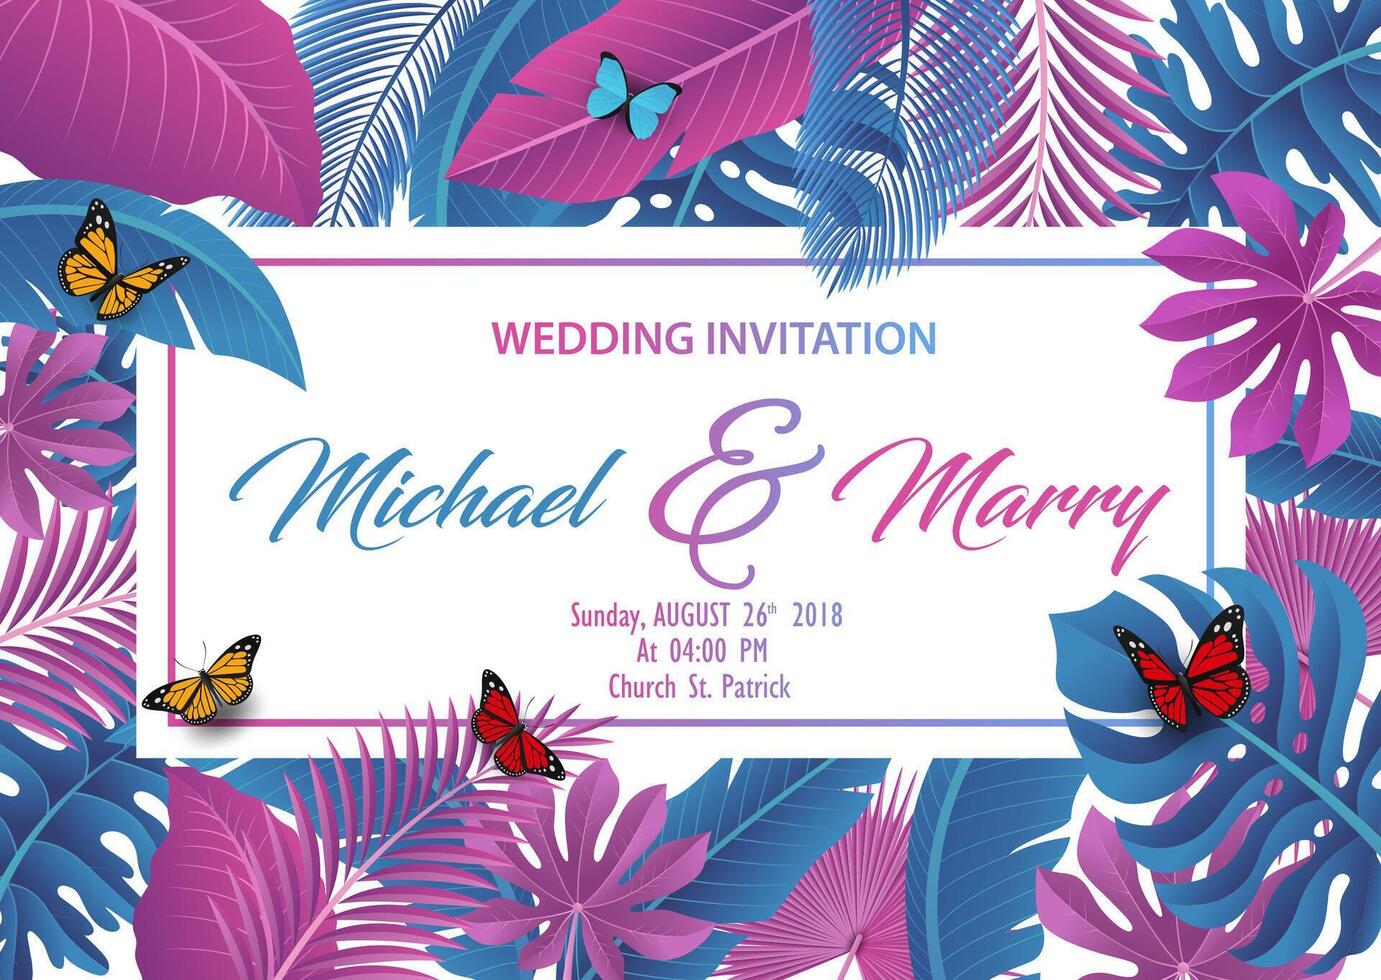 Wedding Invitation with Tropical Leaves Concept, Vector Illustration